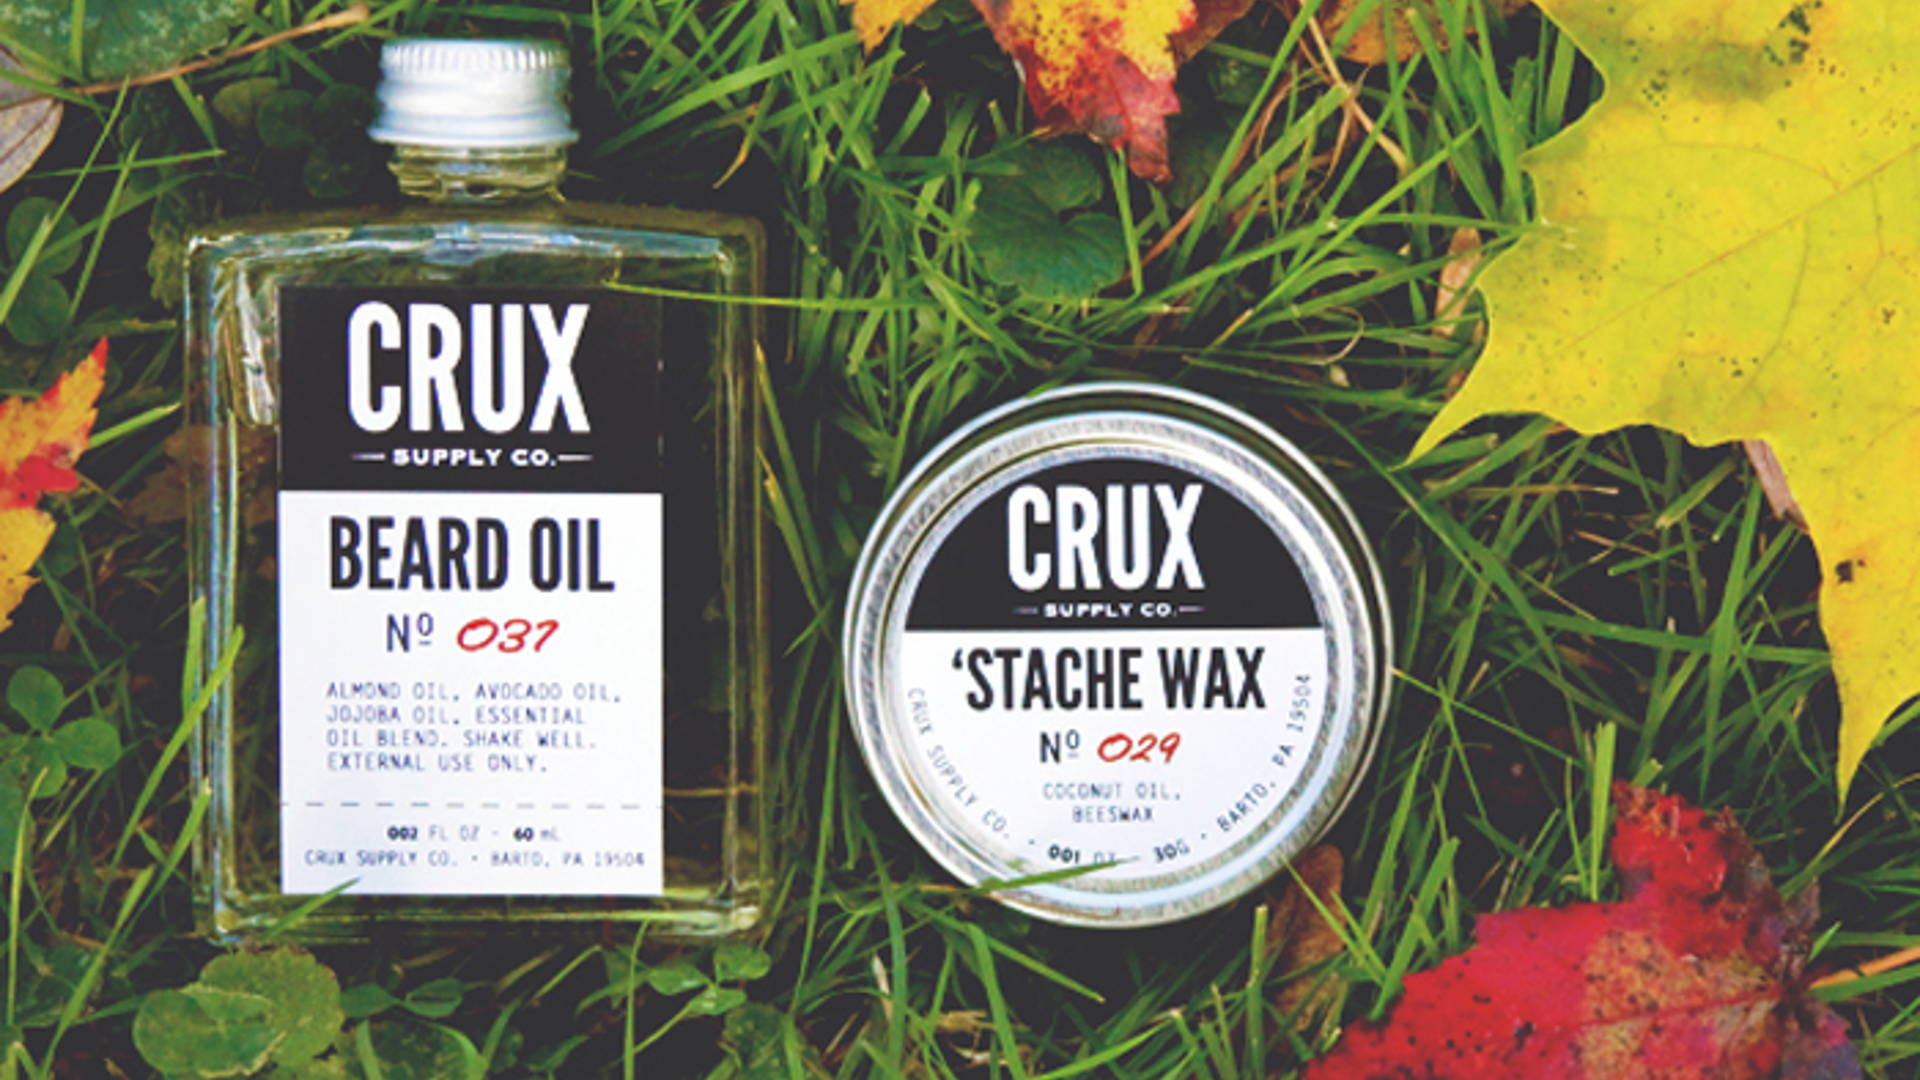 Featured image for Crux Supply Co.